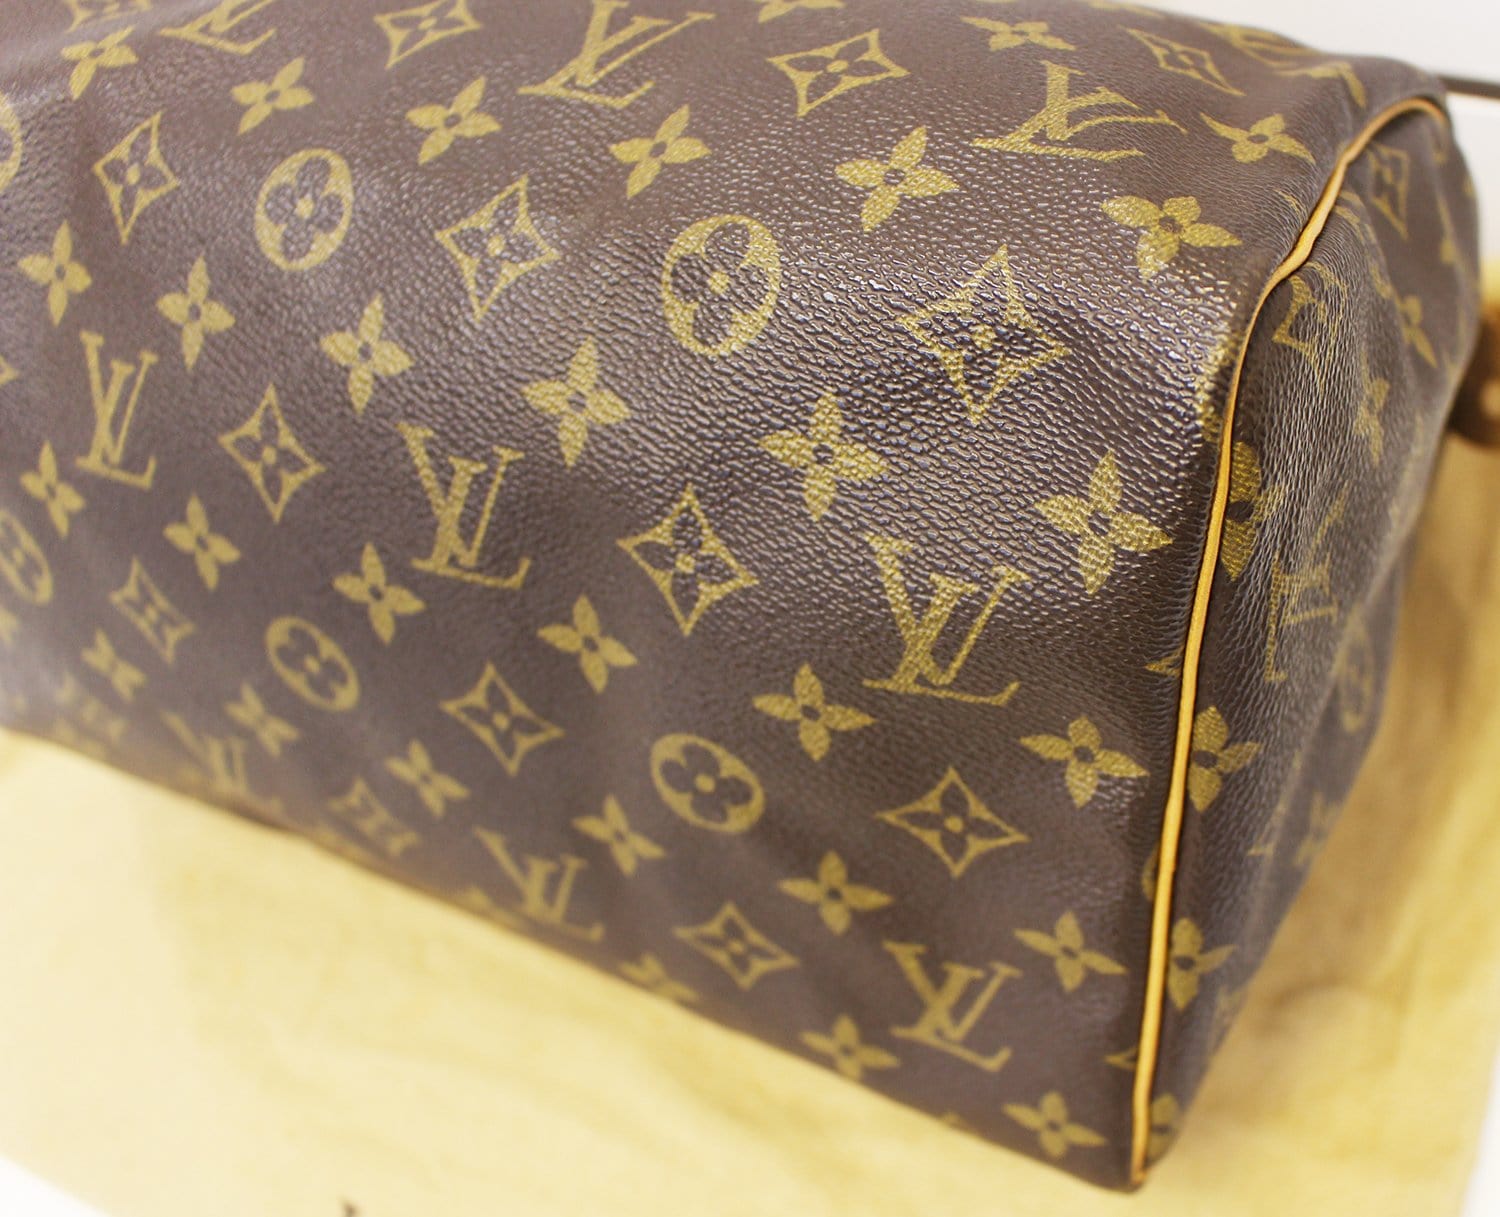 Simple yet effective 🤎 DM to purchase the Louis Vuitton Monogram